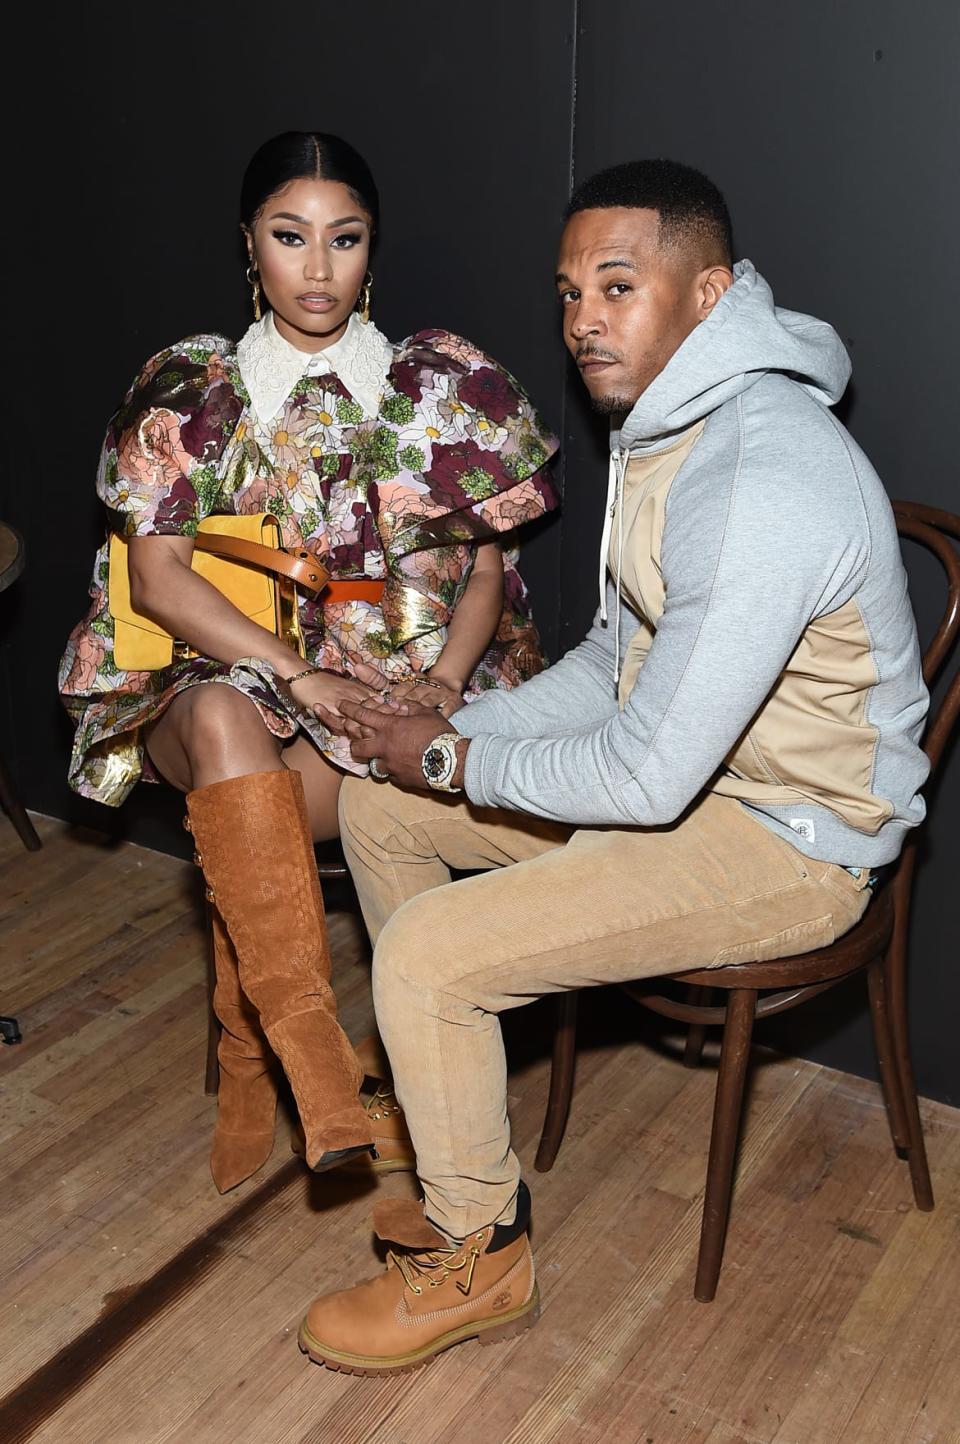 <div class="inline-image__caption"><p>Nicki Minaj and Kenneth Petty attend the Marc Jacobs Fall 2020 runway show in New York.</p></div> <div class="inline-image__credit">Jamie McCarthy</div>